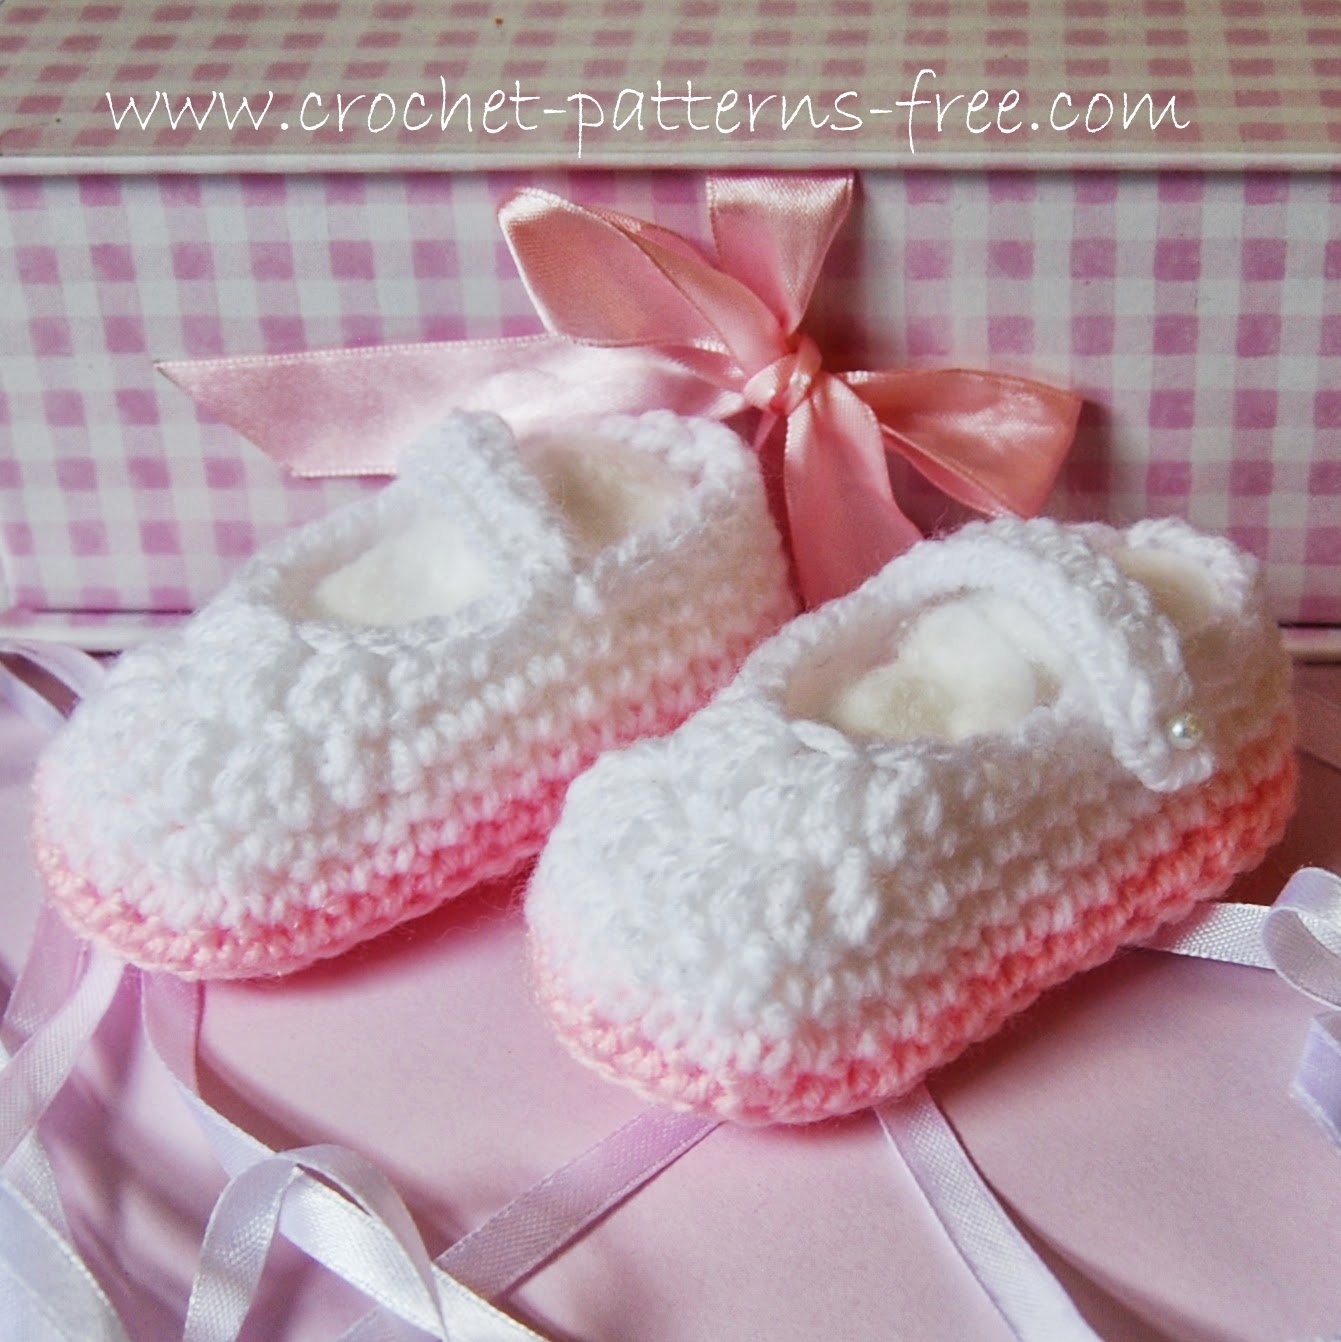 Baby Bootie Shoes Crochet Patterns Free Crochet Patterns for Baby Booties {3-6months}